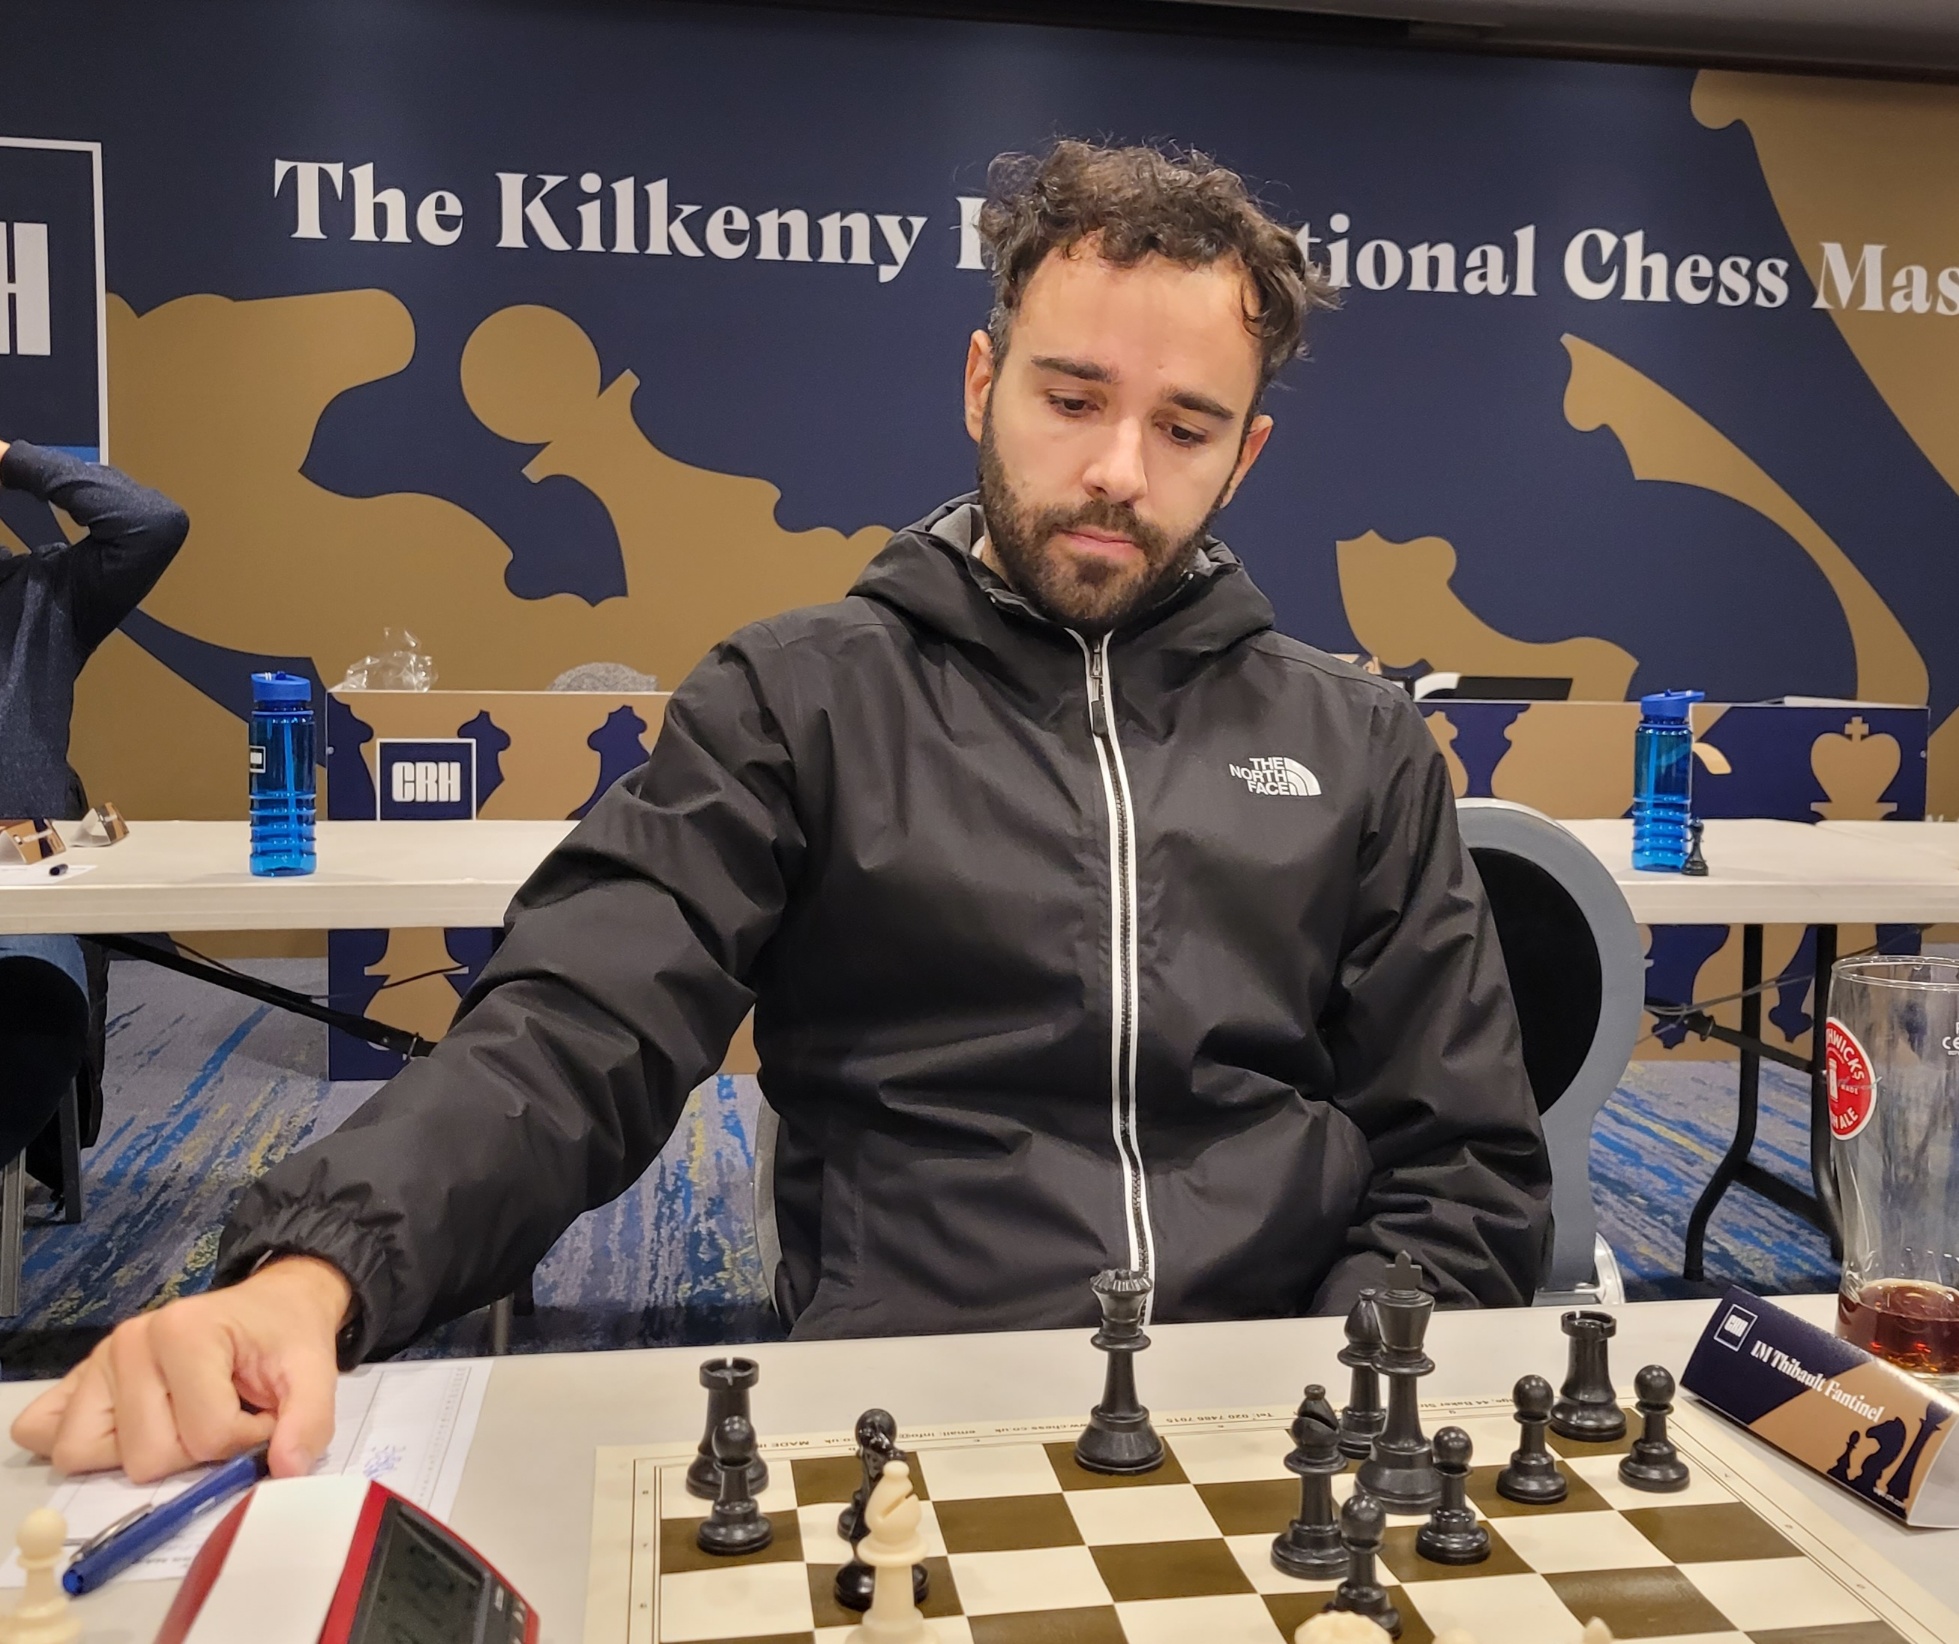 Thibault Fantinel IM, from France at the Kilkenny Masters